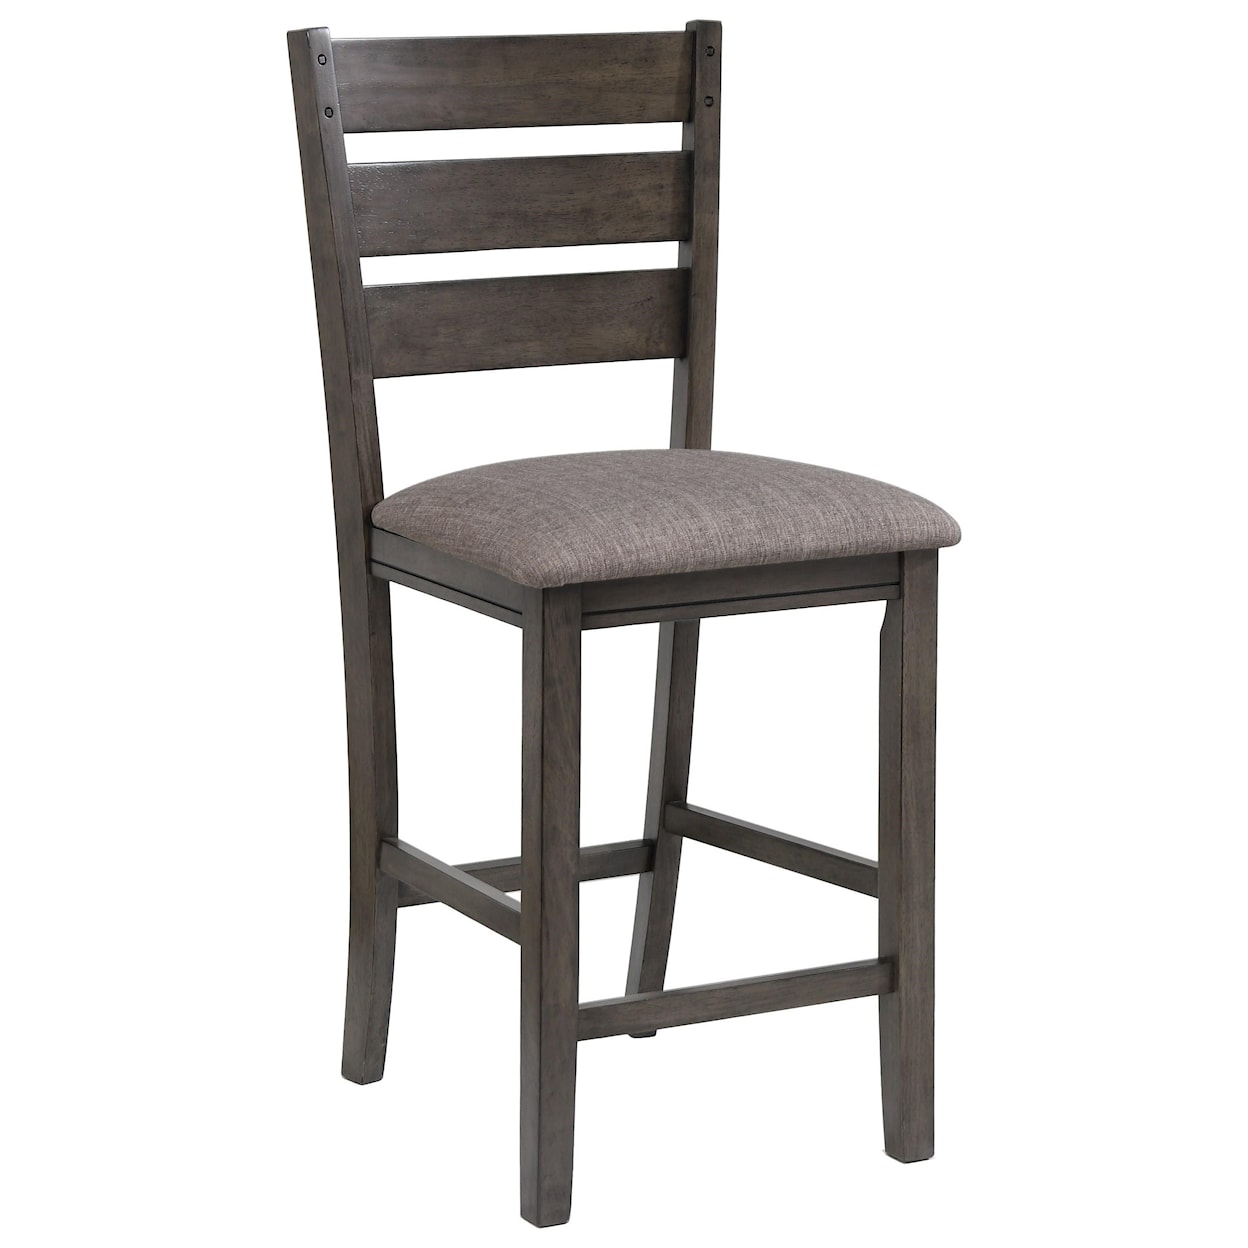 Crown Mark Bardstown Counter Height Chair